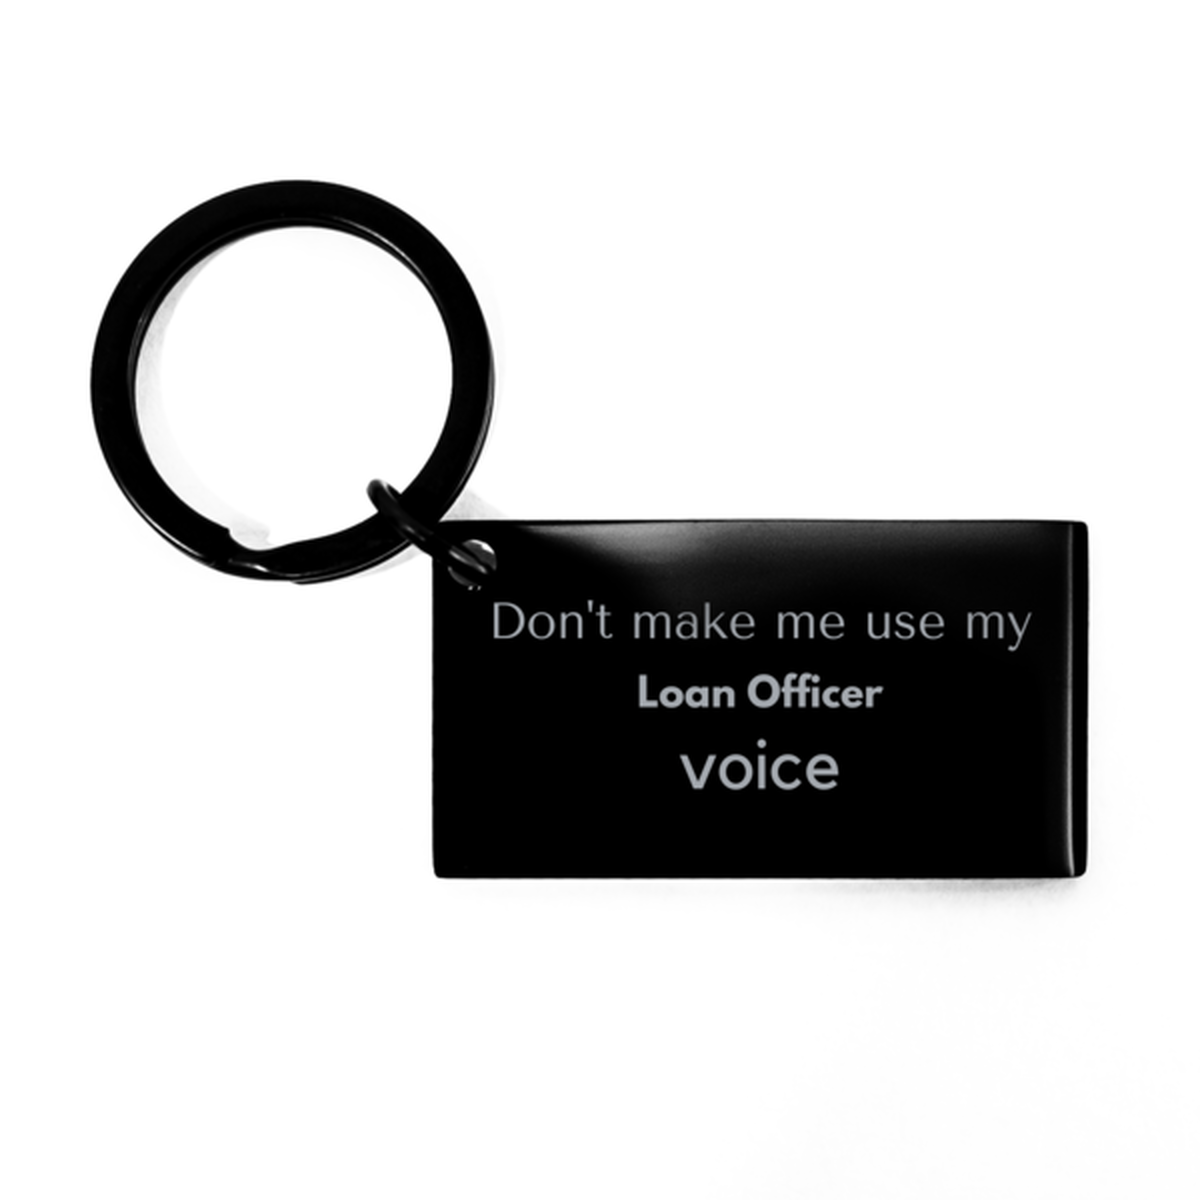 Don't make me use my Loan Officer voice, Sarcasm Loan Officer Gifts, Christmas Loan Officer Keychain Birthday Unique Gifts For Loan Officer Coworkers, Men, Women, Colleague, Friends